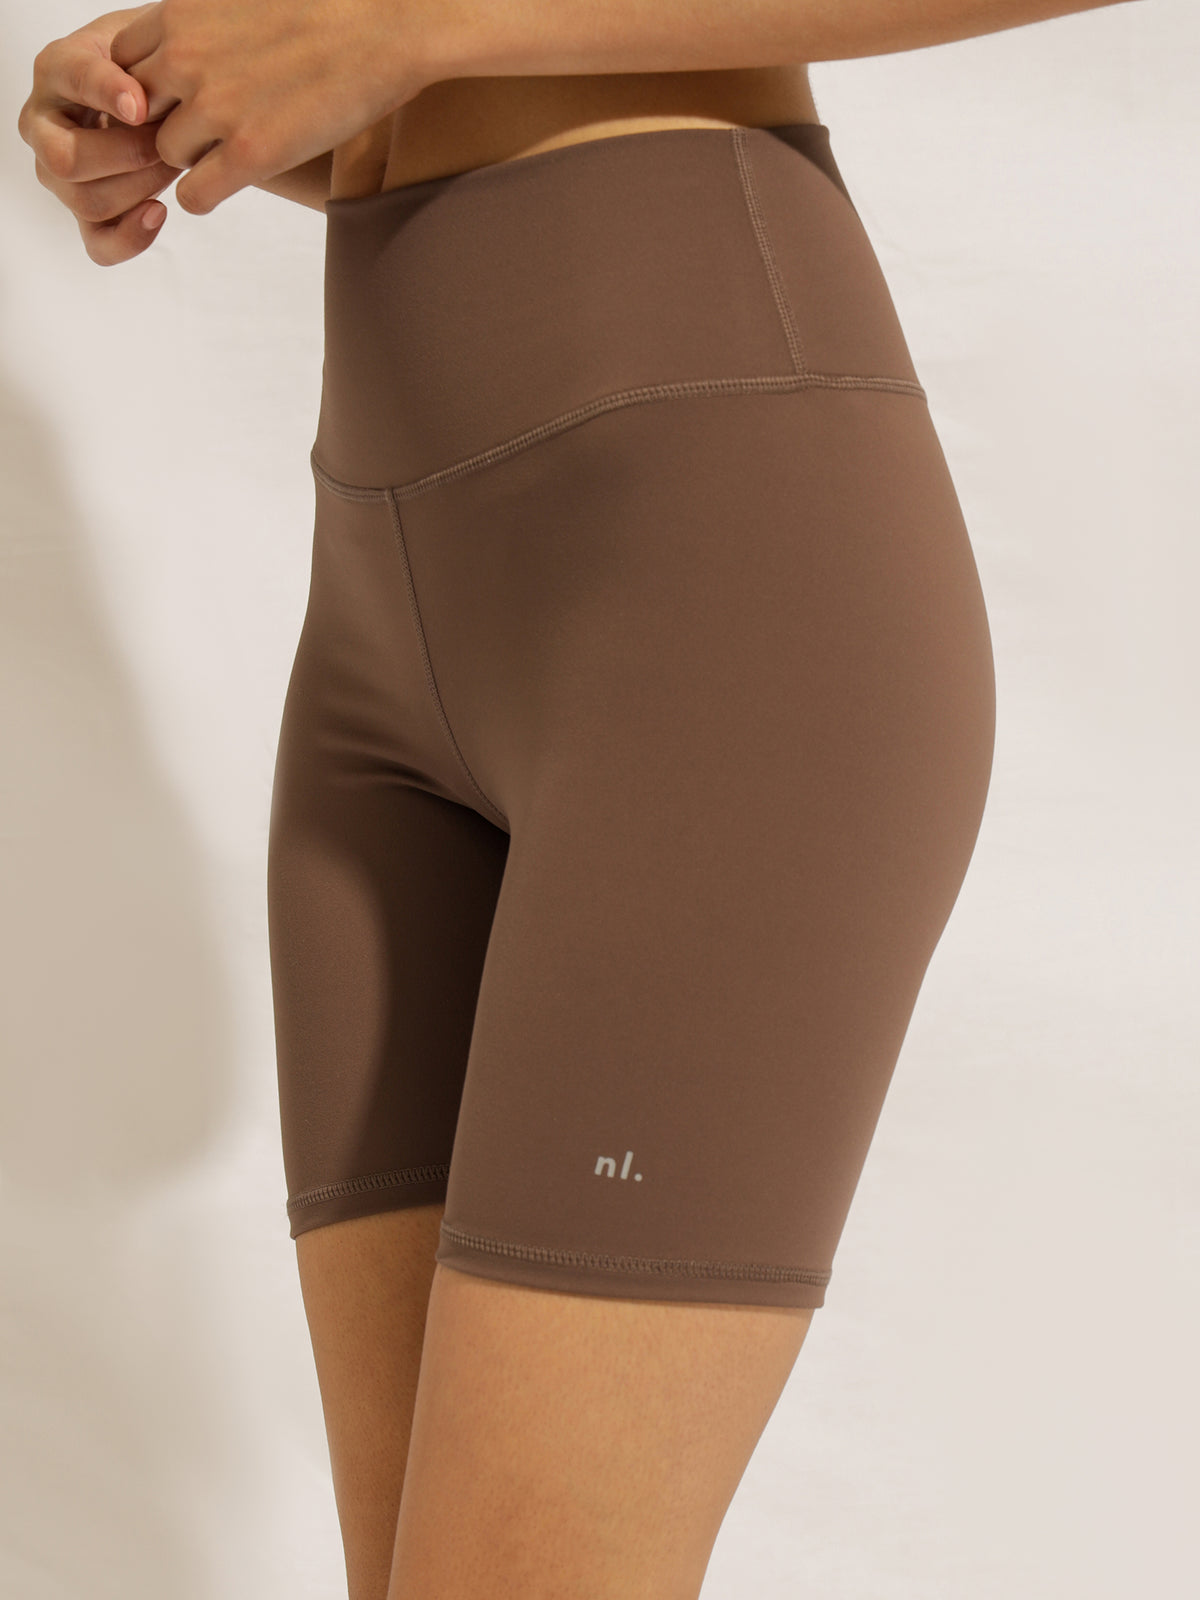 Nude Active High-Rise Bike Shorts in Chestnut Brown